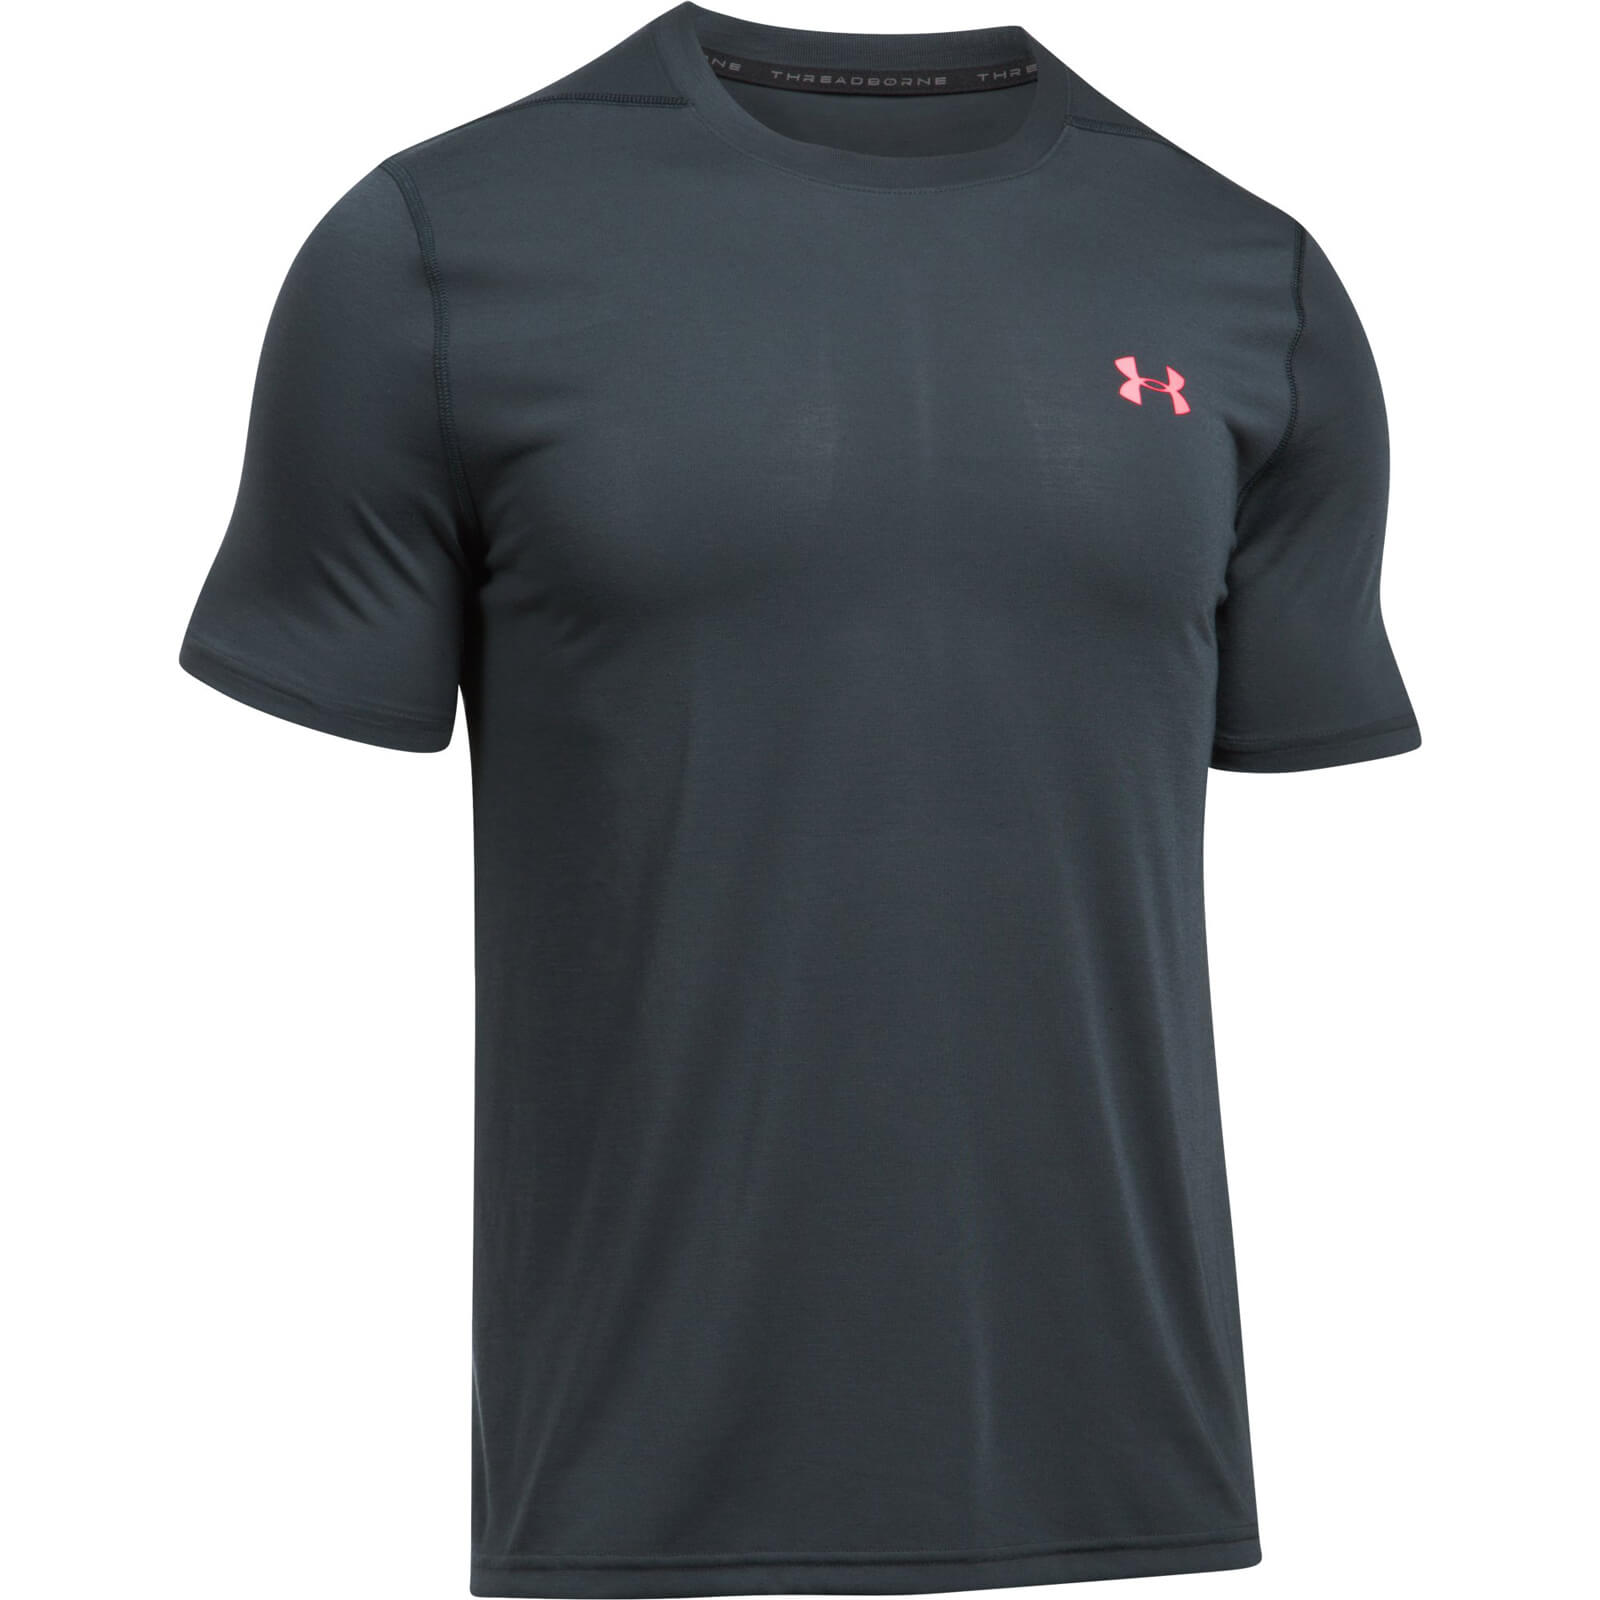 under armour men's fitted t shirt